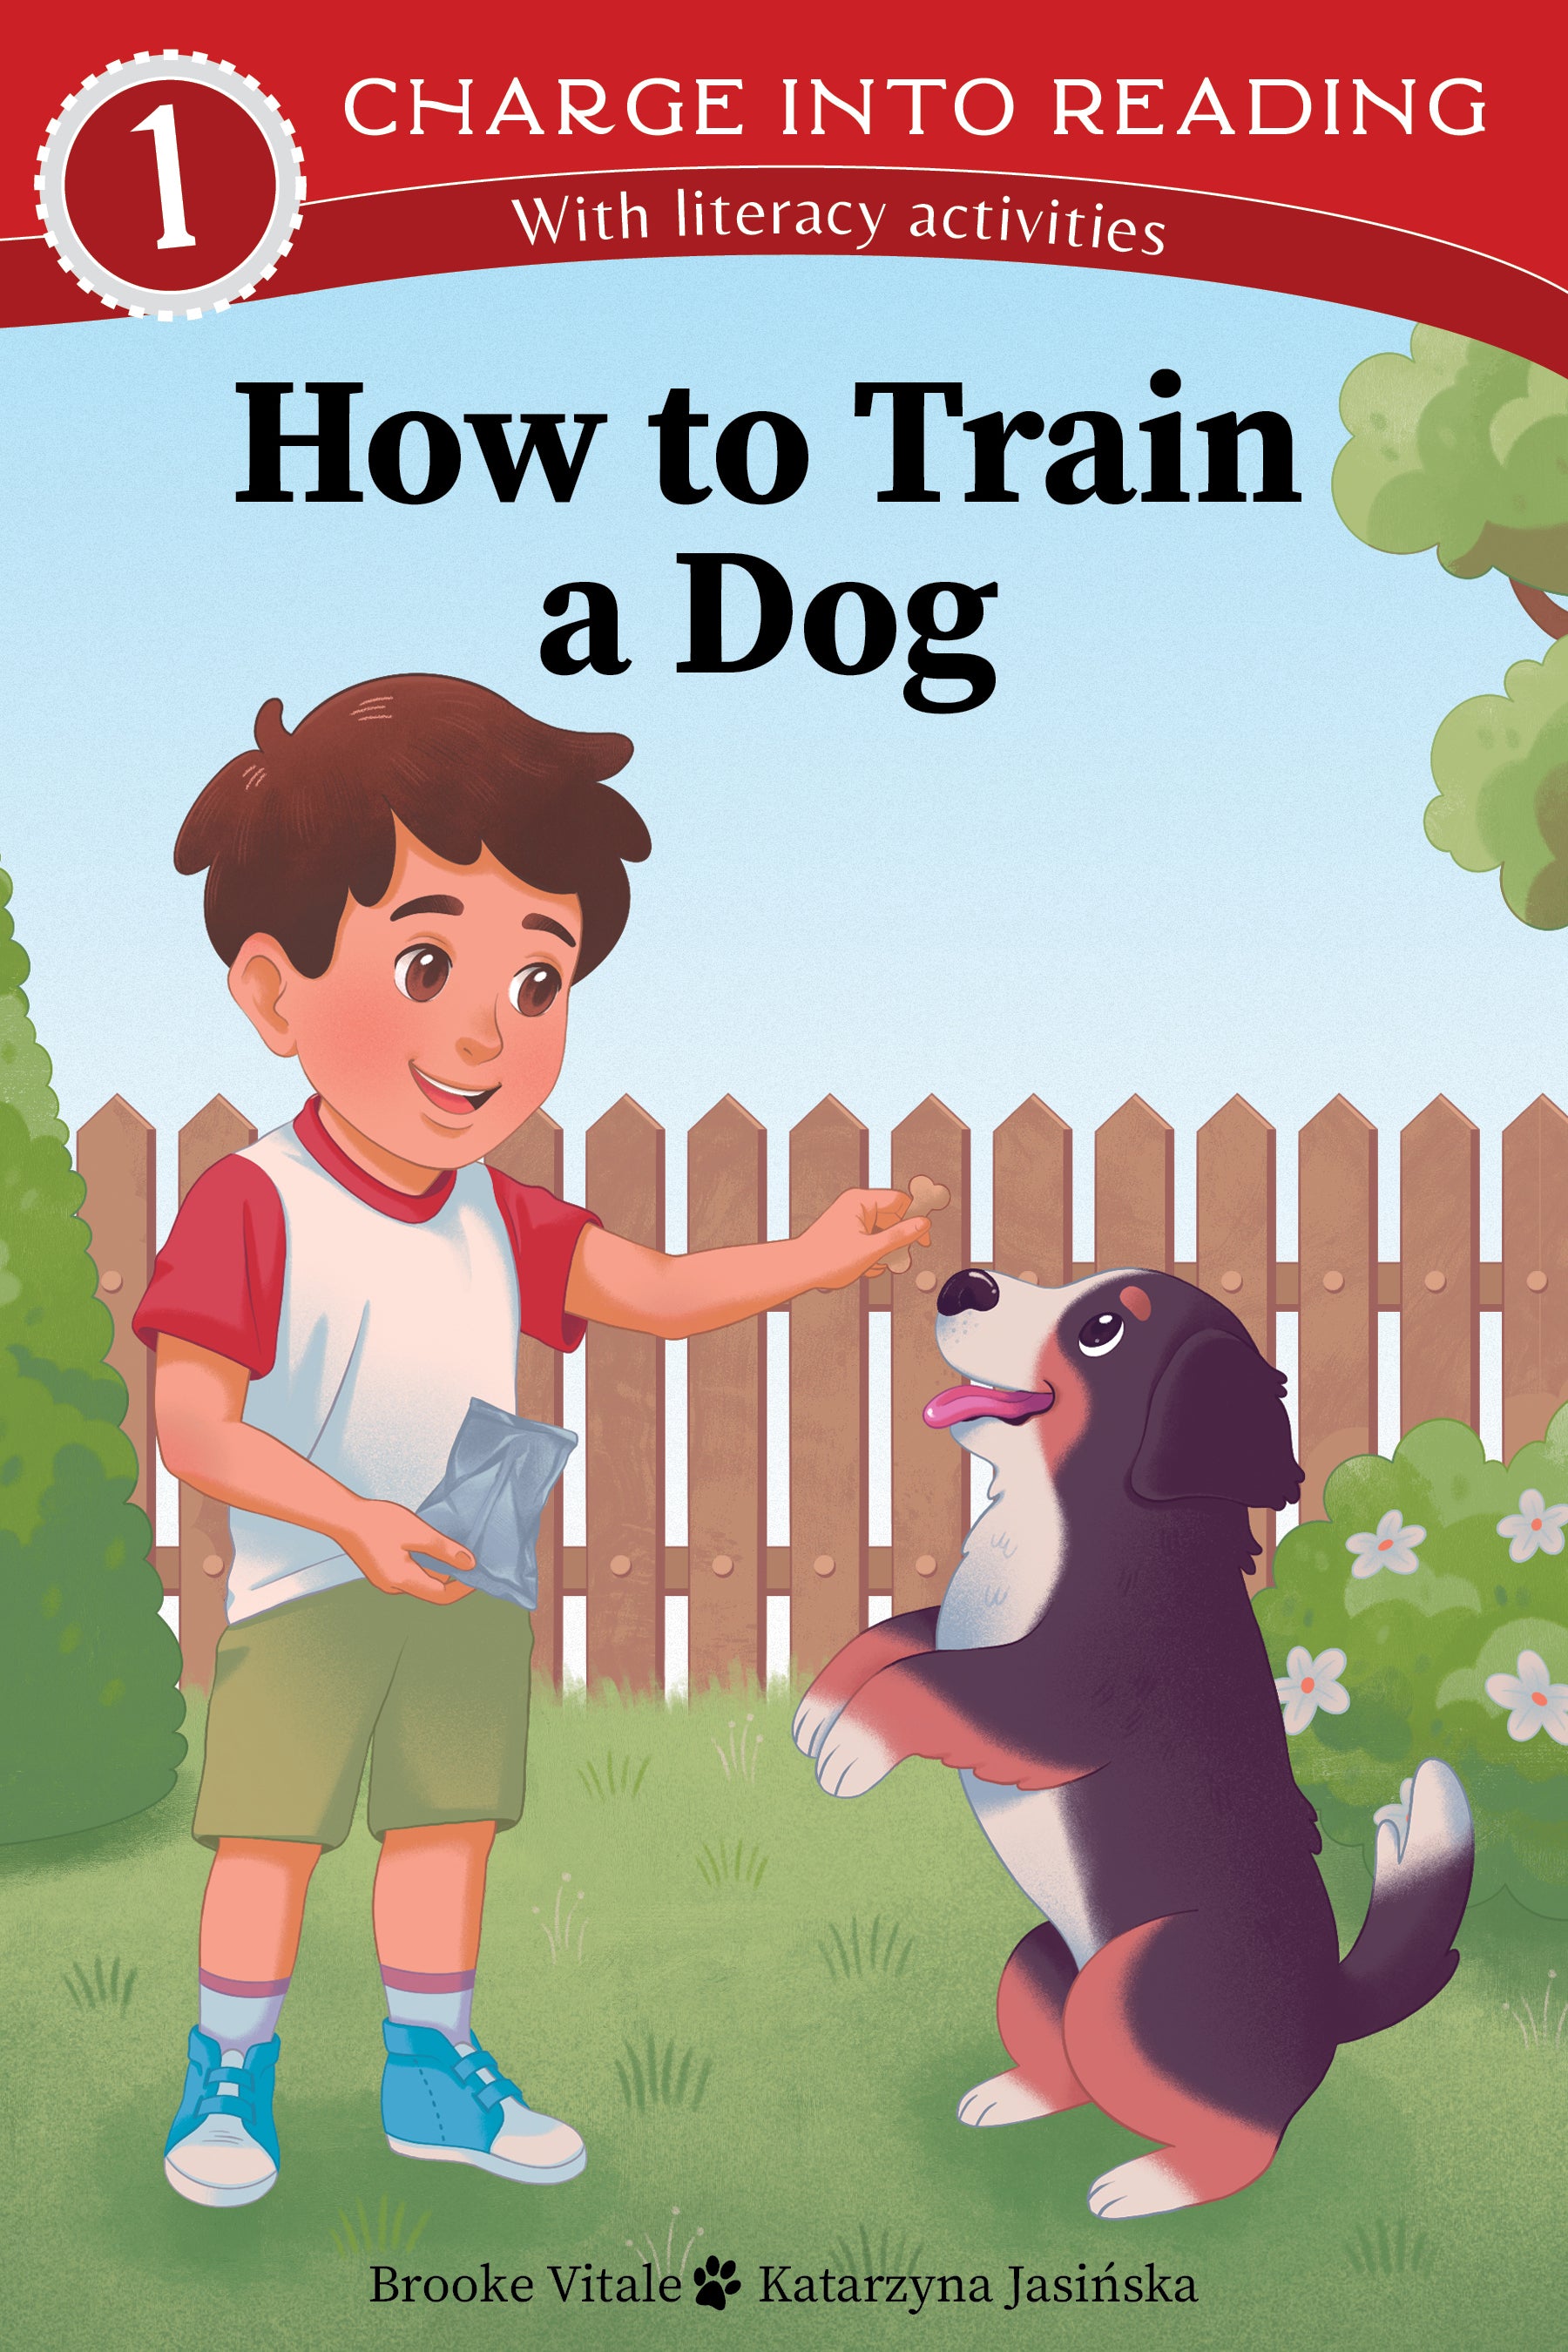 Dog　Charge　Level　A　Book　Books　Train　How　Dog:　Mommy　to　for　Lovers　a　Reading　–